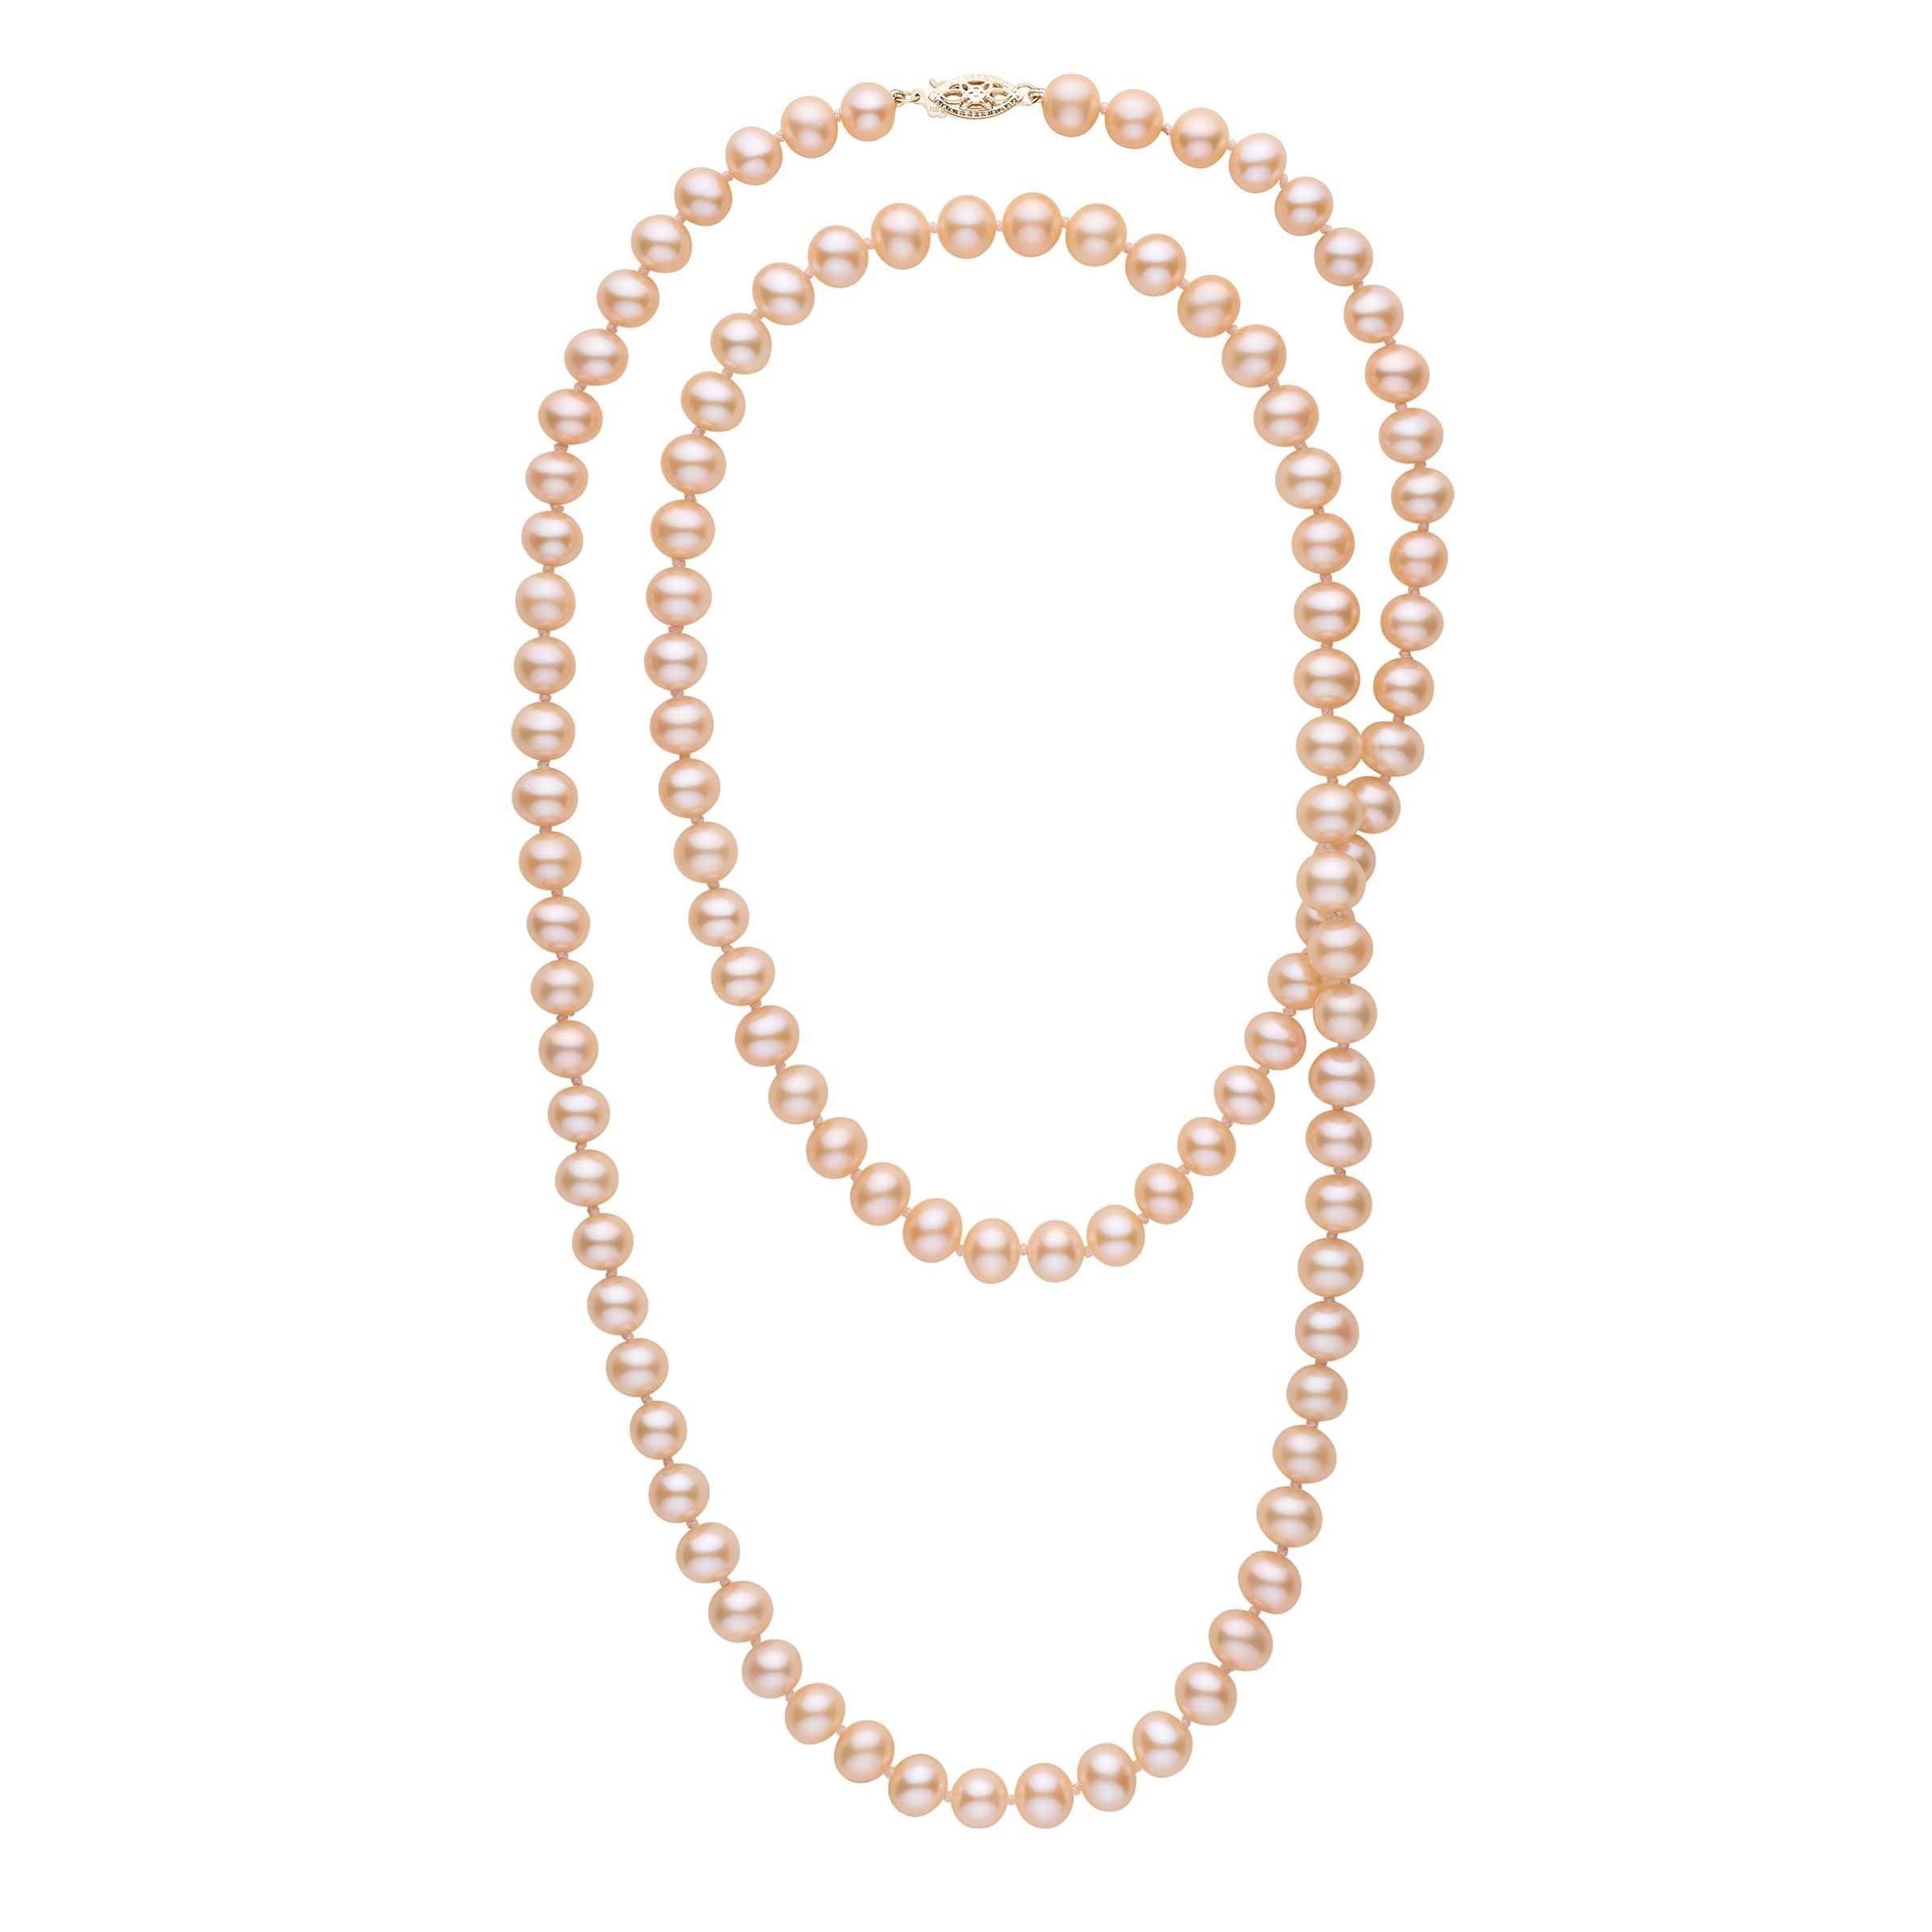 35-inch 7.5-8.0 mm AA+ Pink to Peach Freshwater Pearl Necklace